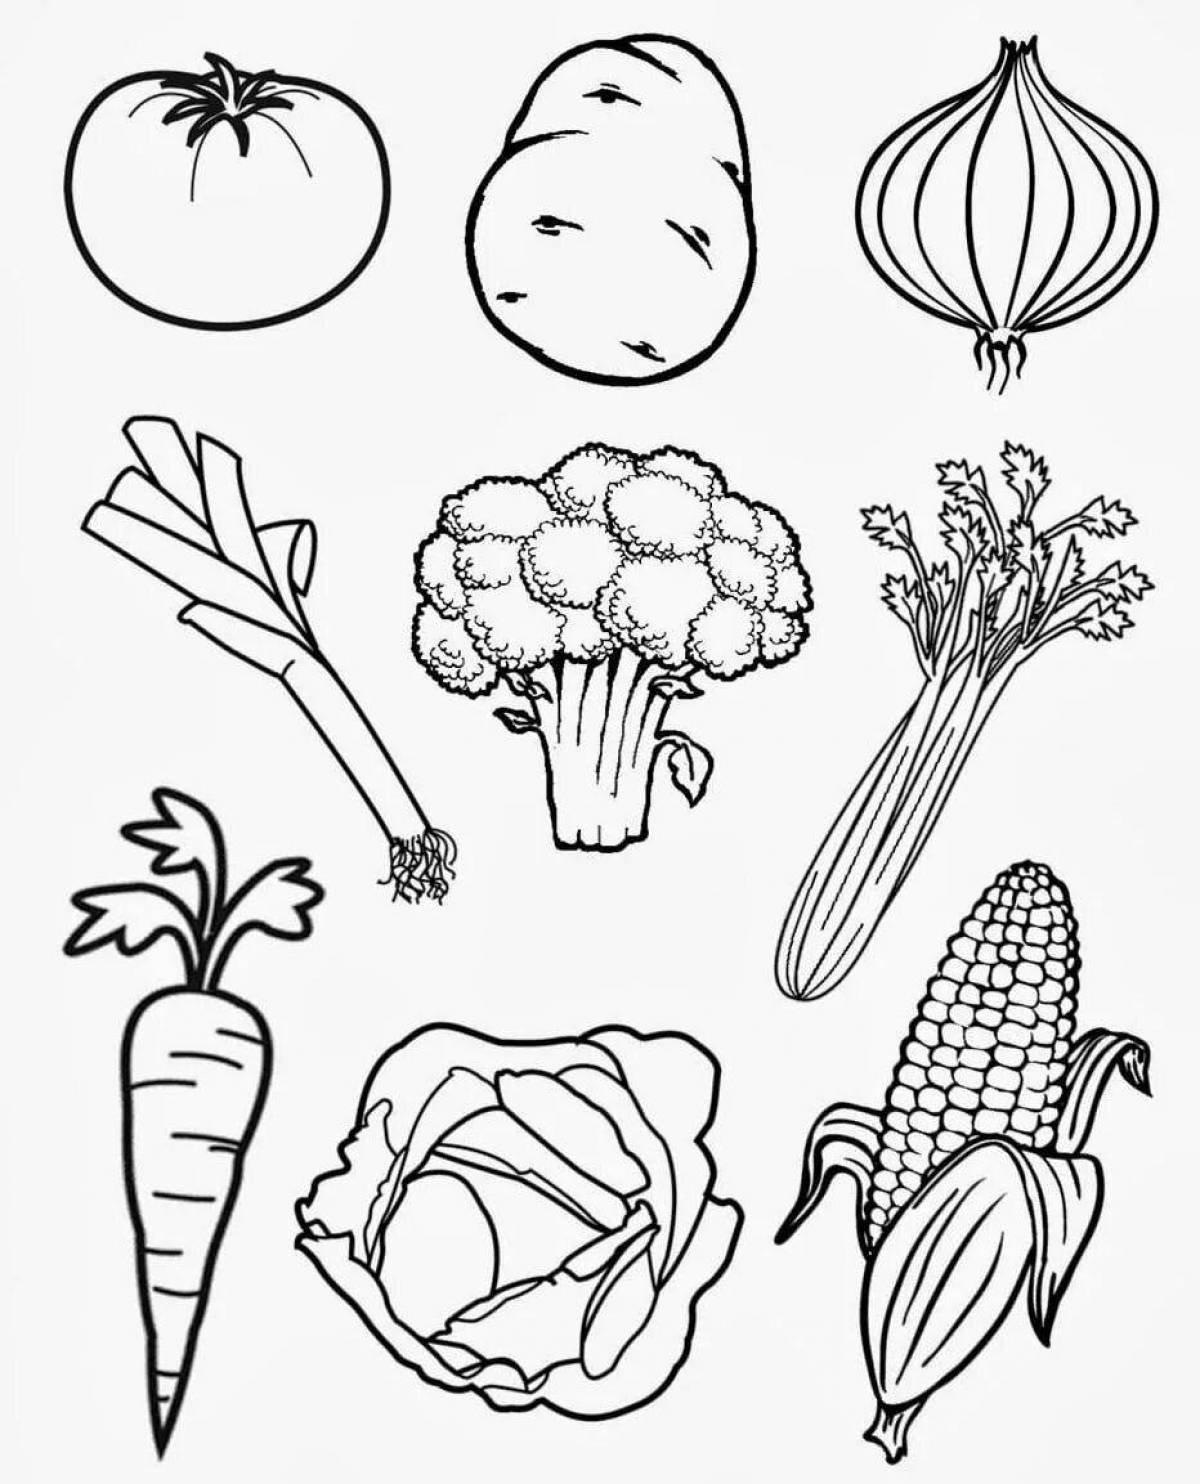 Great vegetable and fruit coloring book for kids